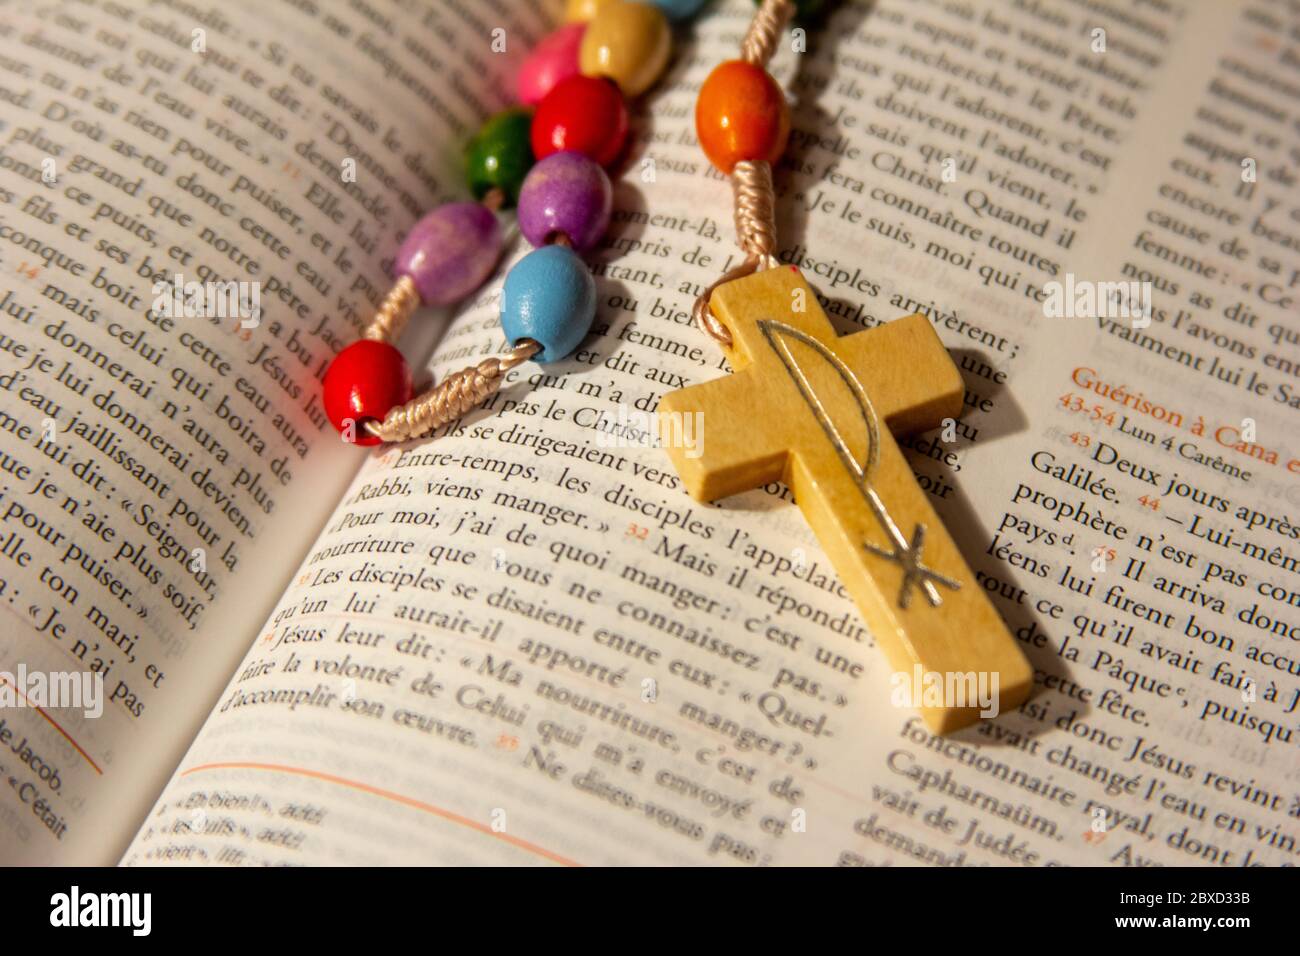 A rosary in an open Bible in French. Stock Photo